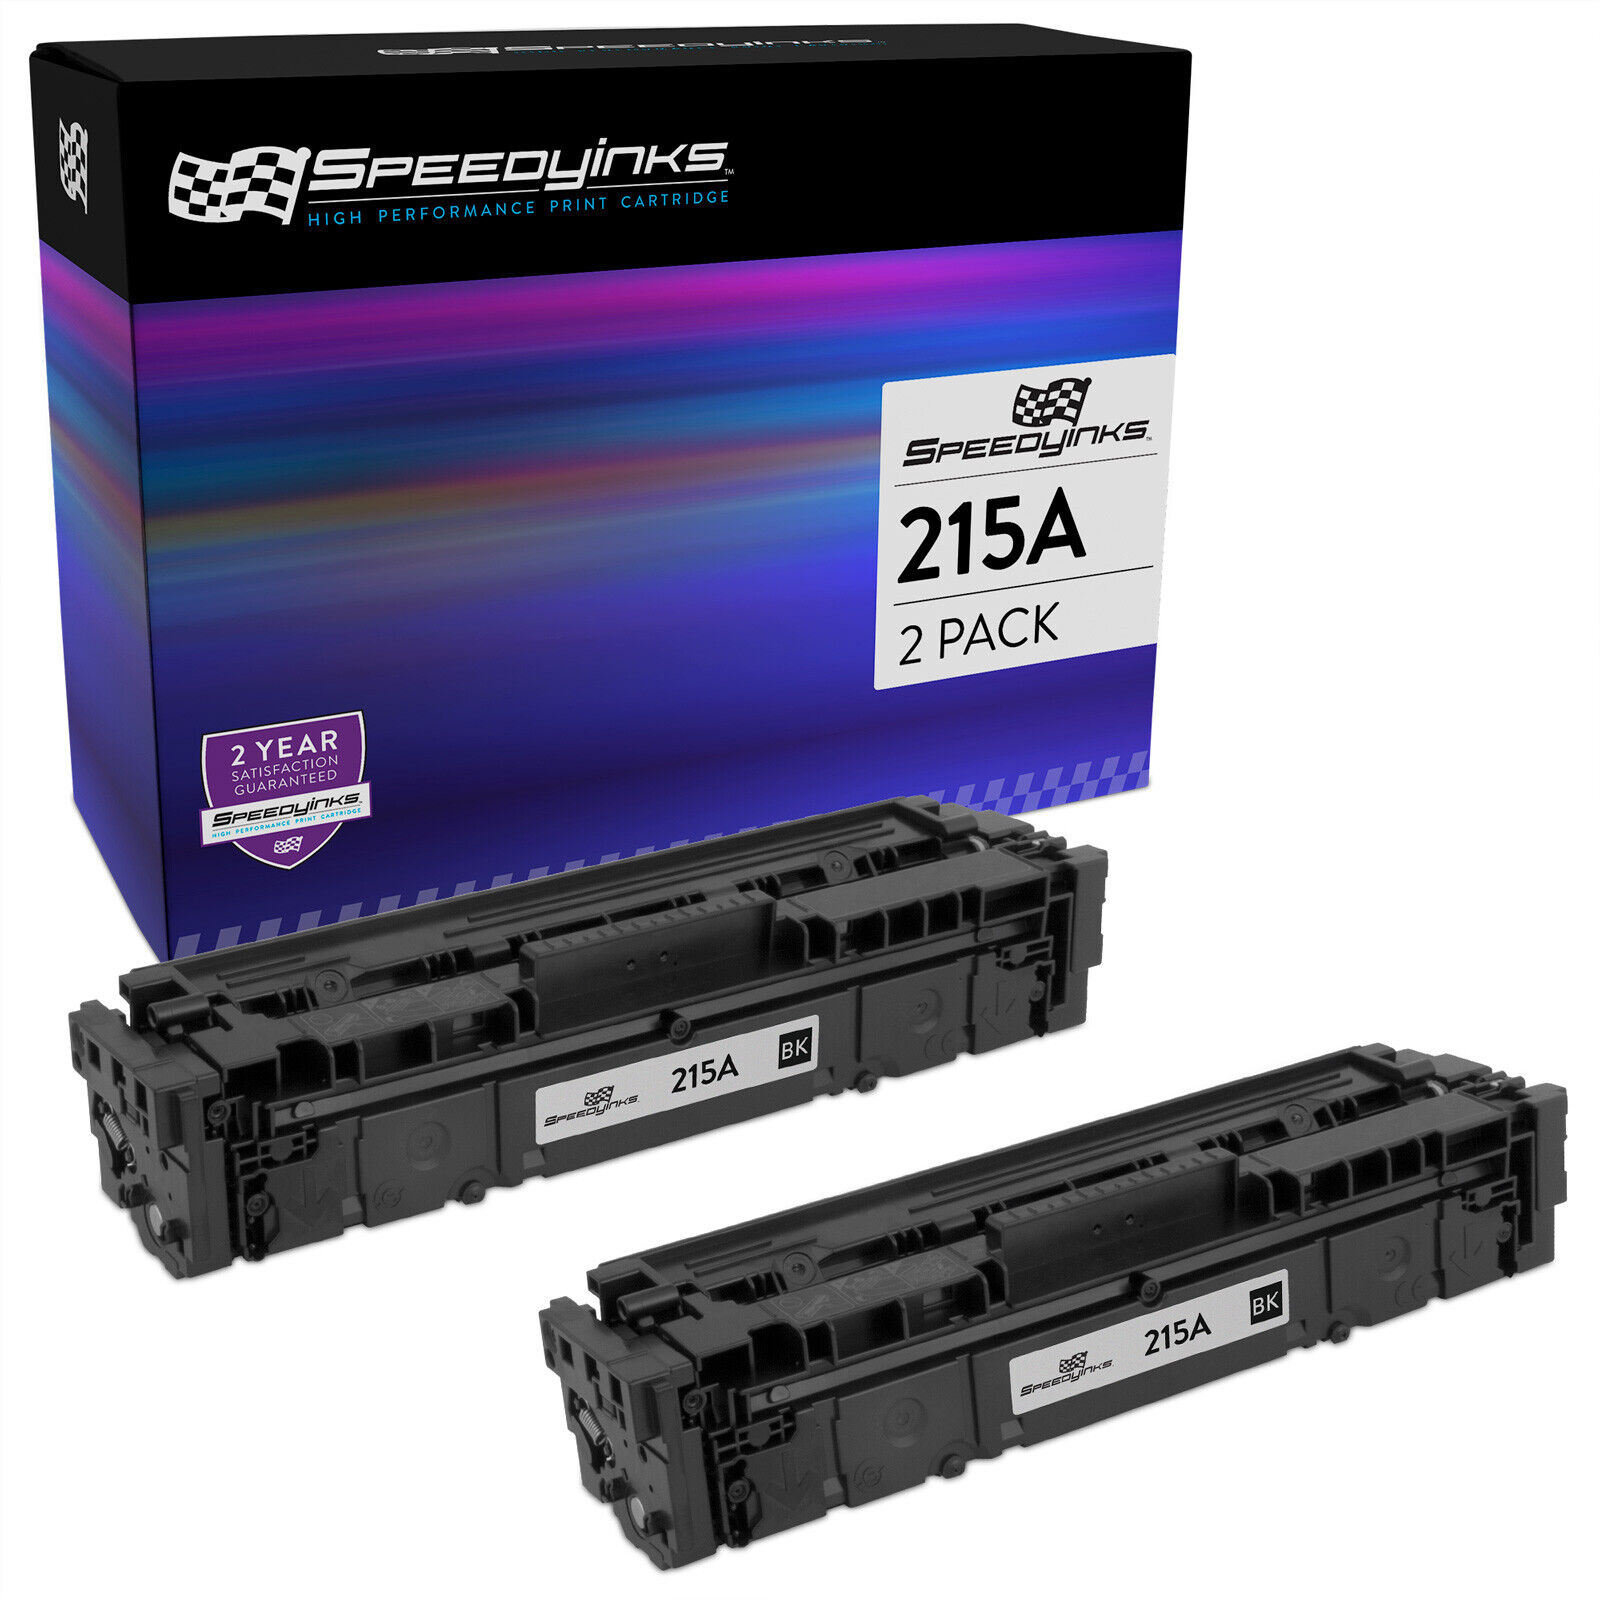 Speedy 2PK Replacement for HP 215A W2310A Black Toner With Chip M183fw, M182nw